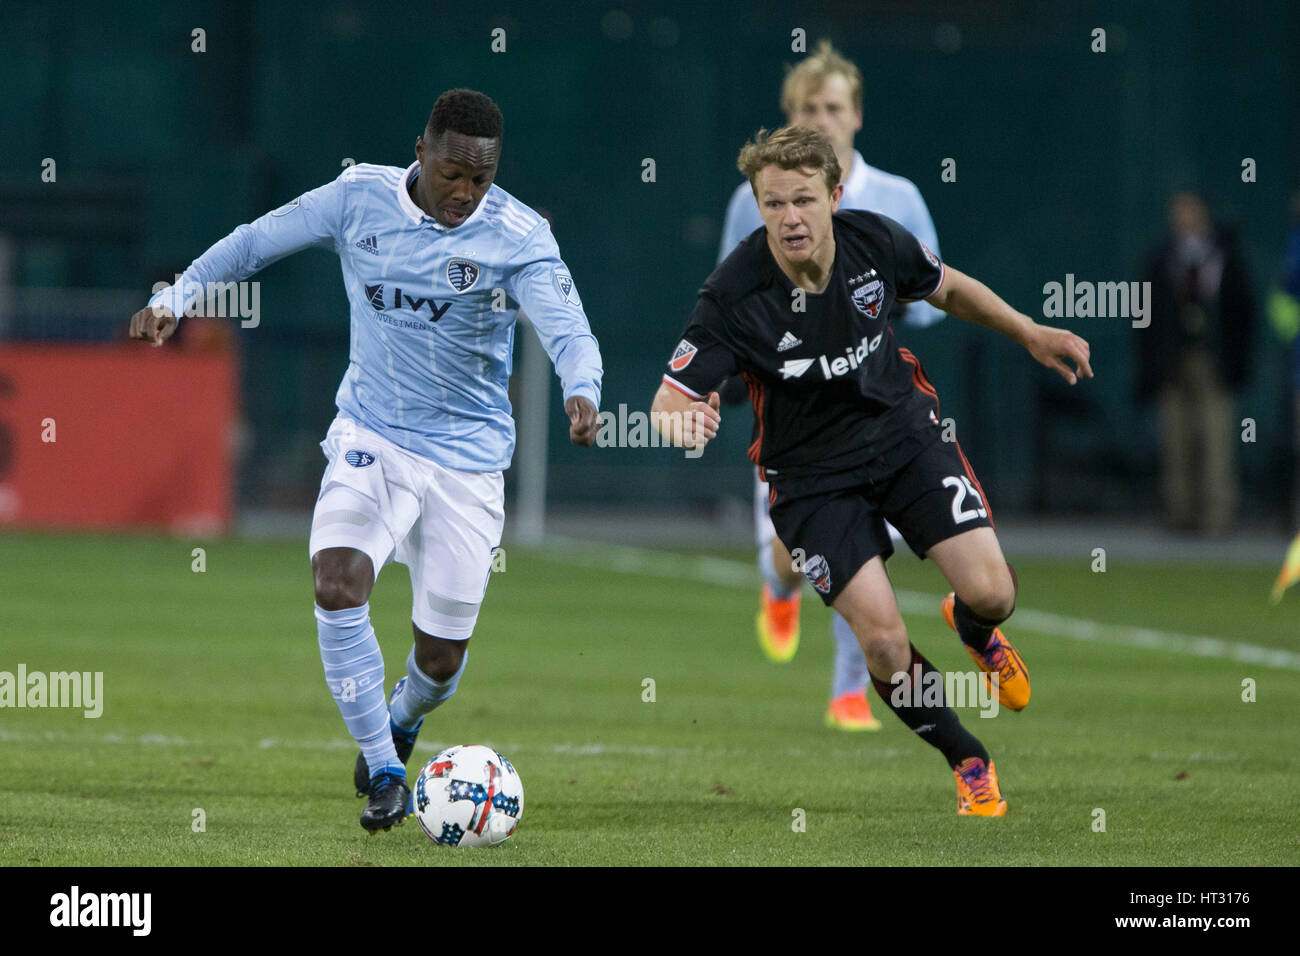 Sporting Kansas City forward Gerso Fernades (7) and D.C. United defender Taylor Kemp (2) during D.C. United's home opener against Sporting Kansas City which finished 0-0 at RFK Stadium in Washington, D.C. on Saturday March 4, 2017. Stock Photo